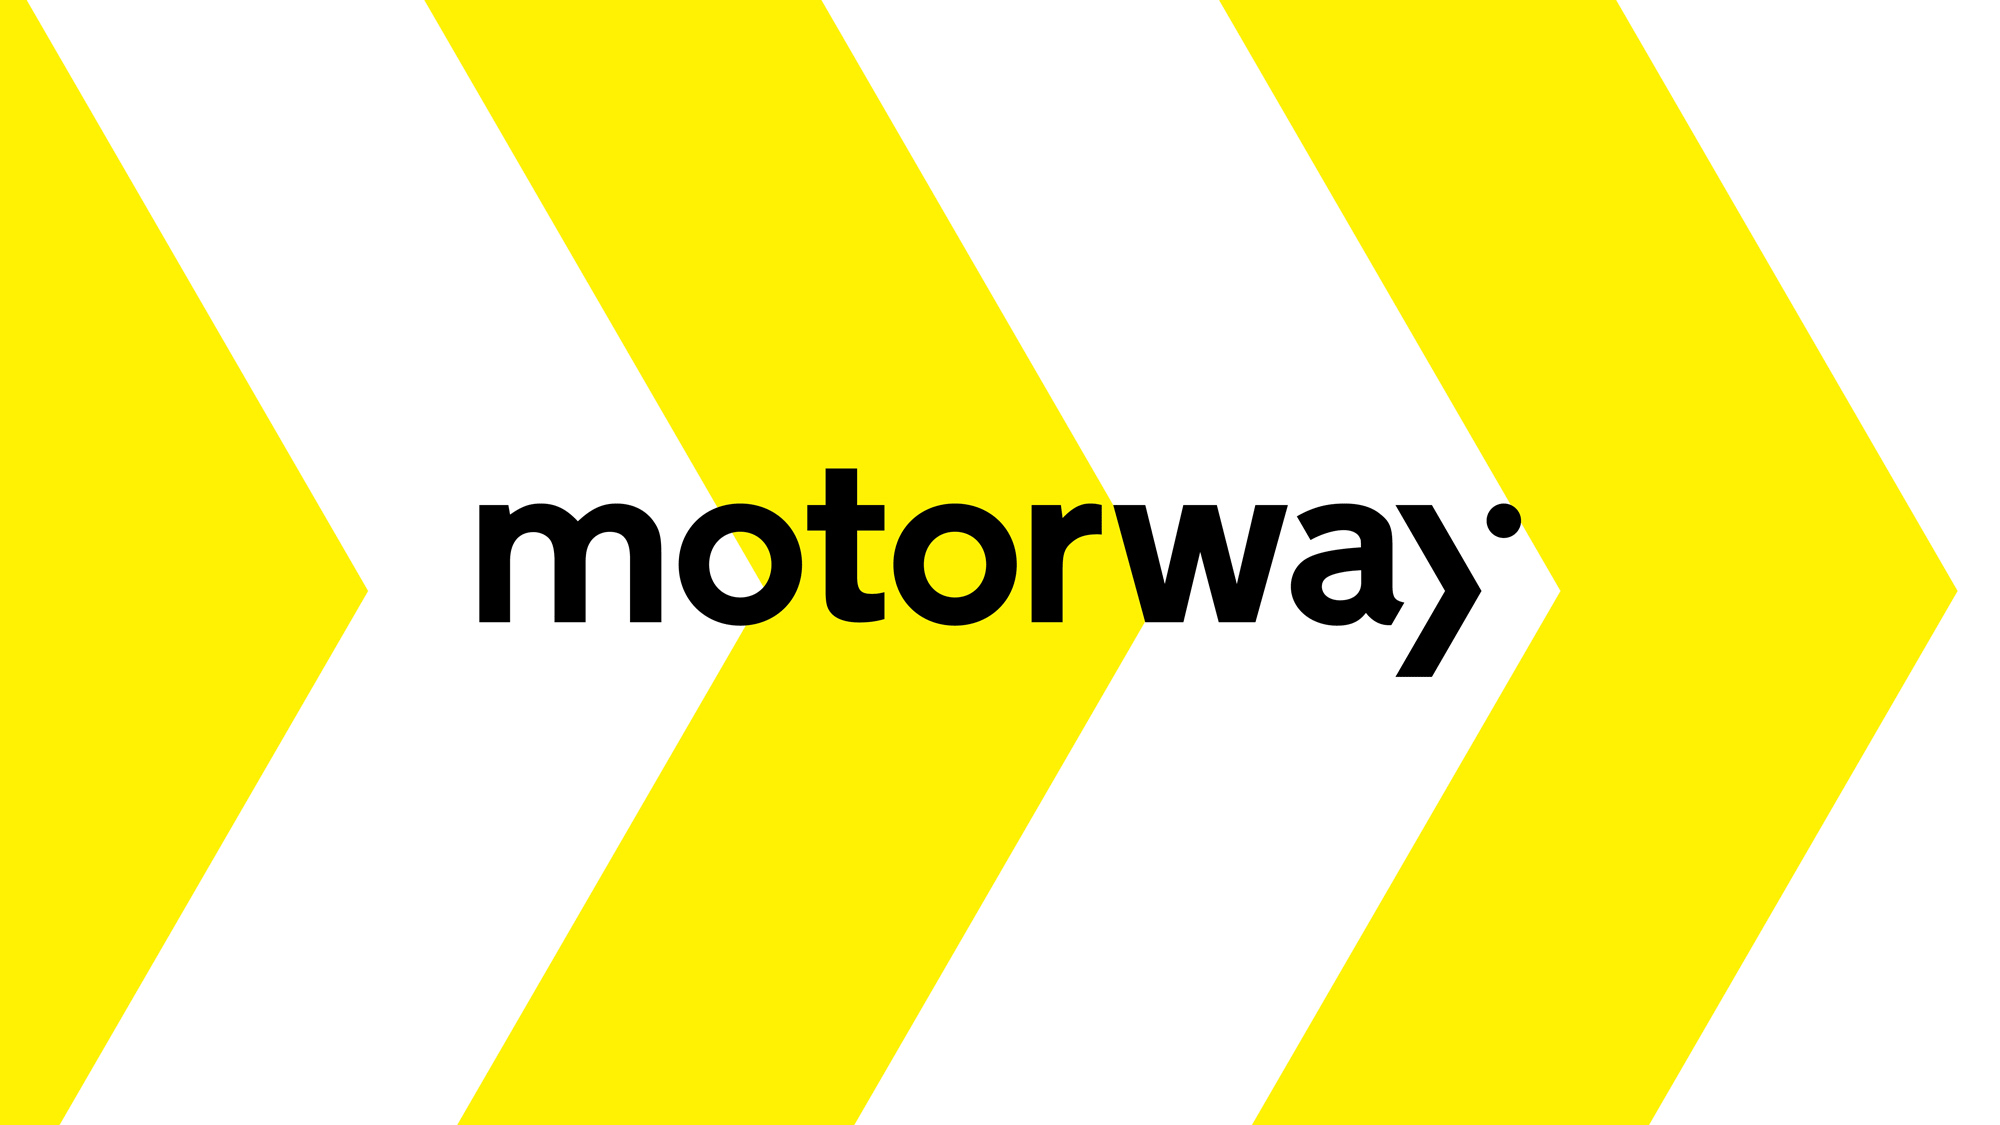 New Logo and Identity for Motorway by Koto